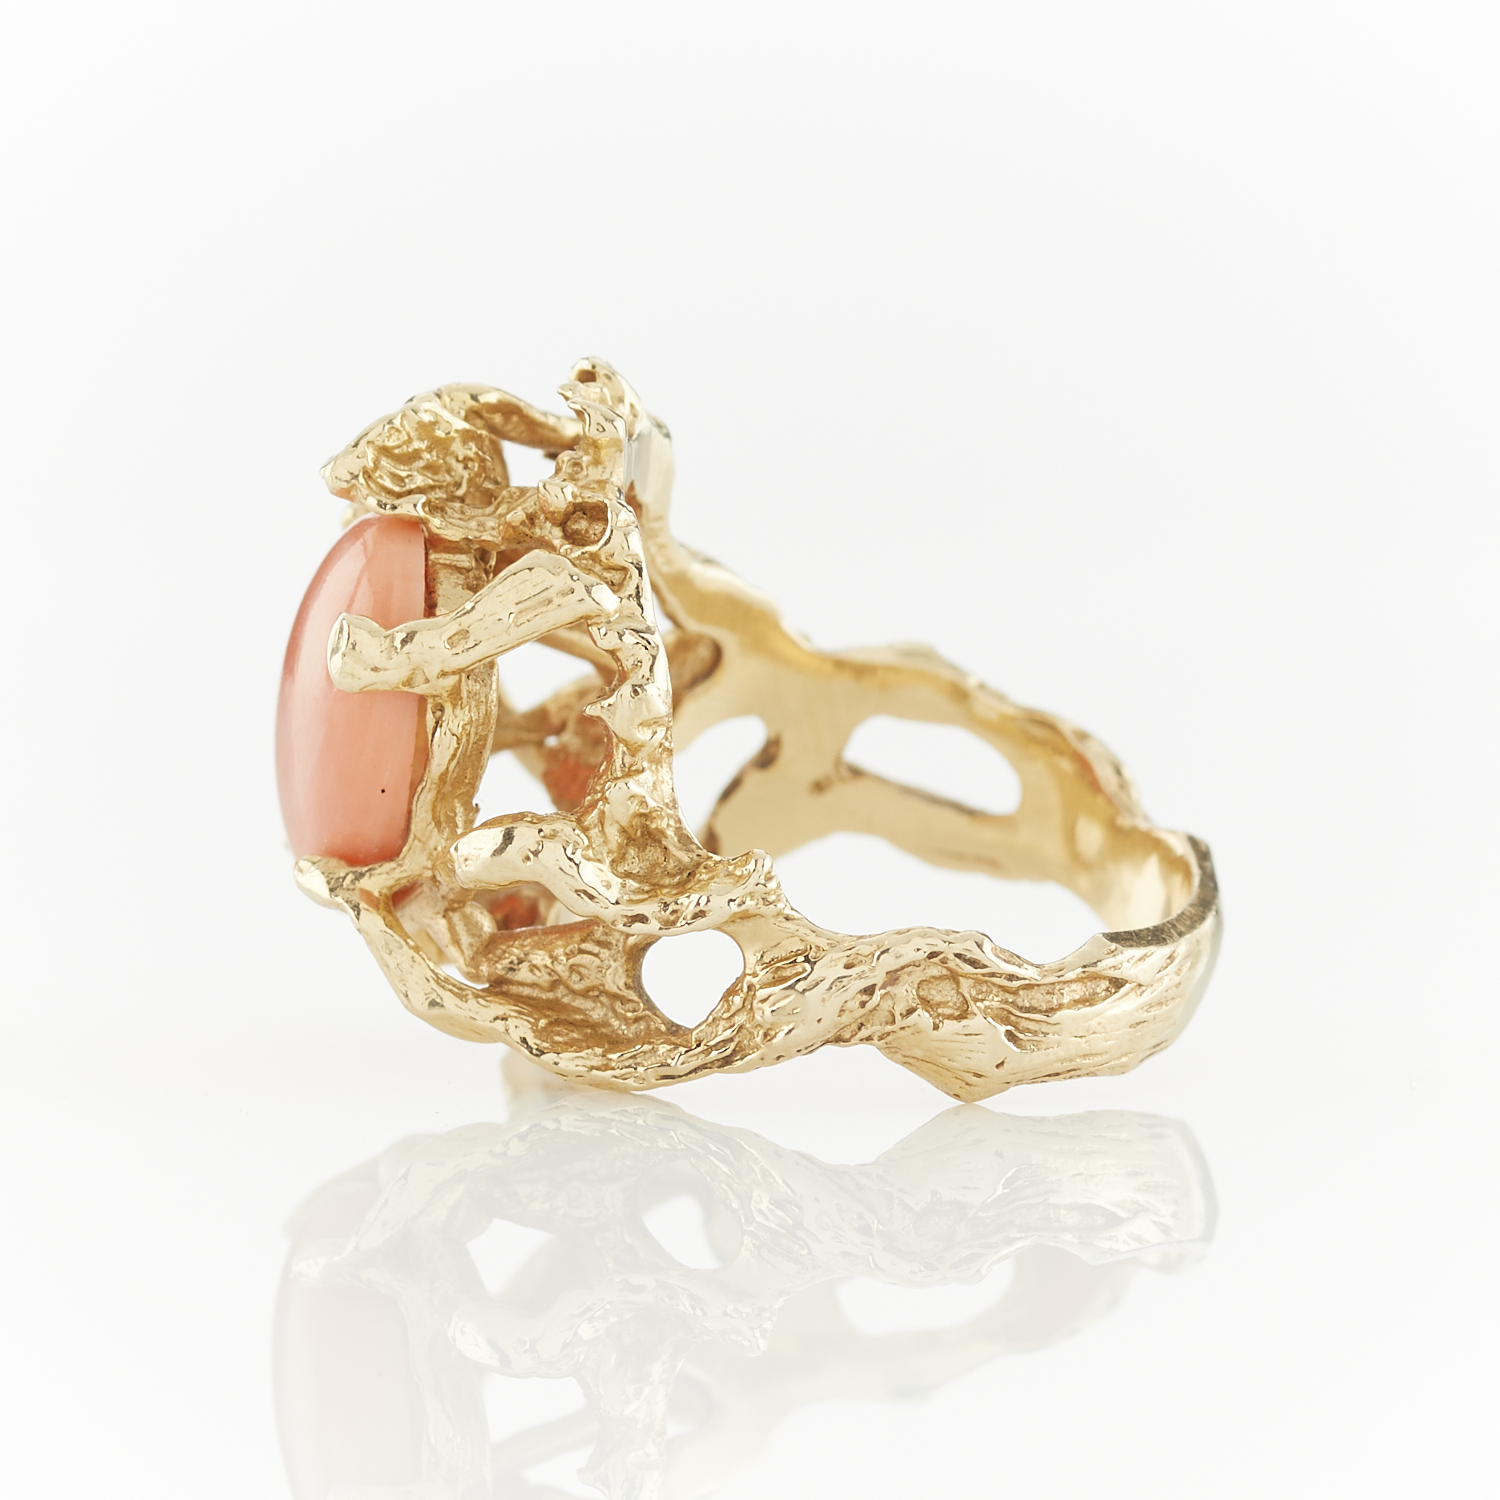 14k Yellow Gold & Coral Ring - Image 7 of 11